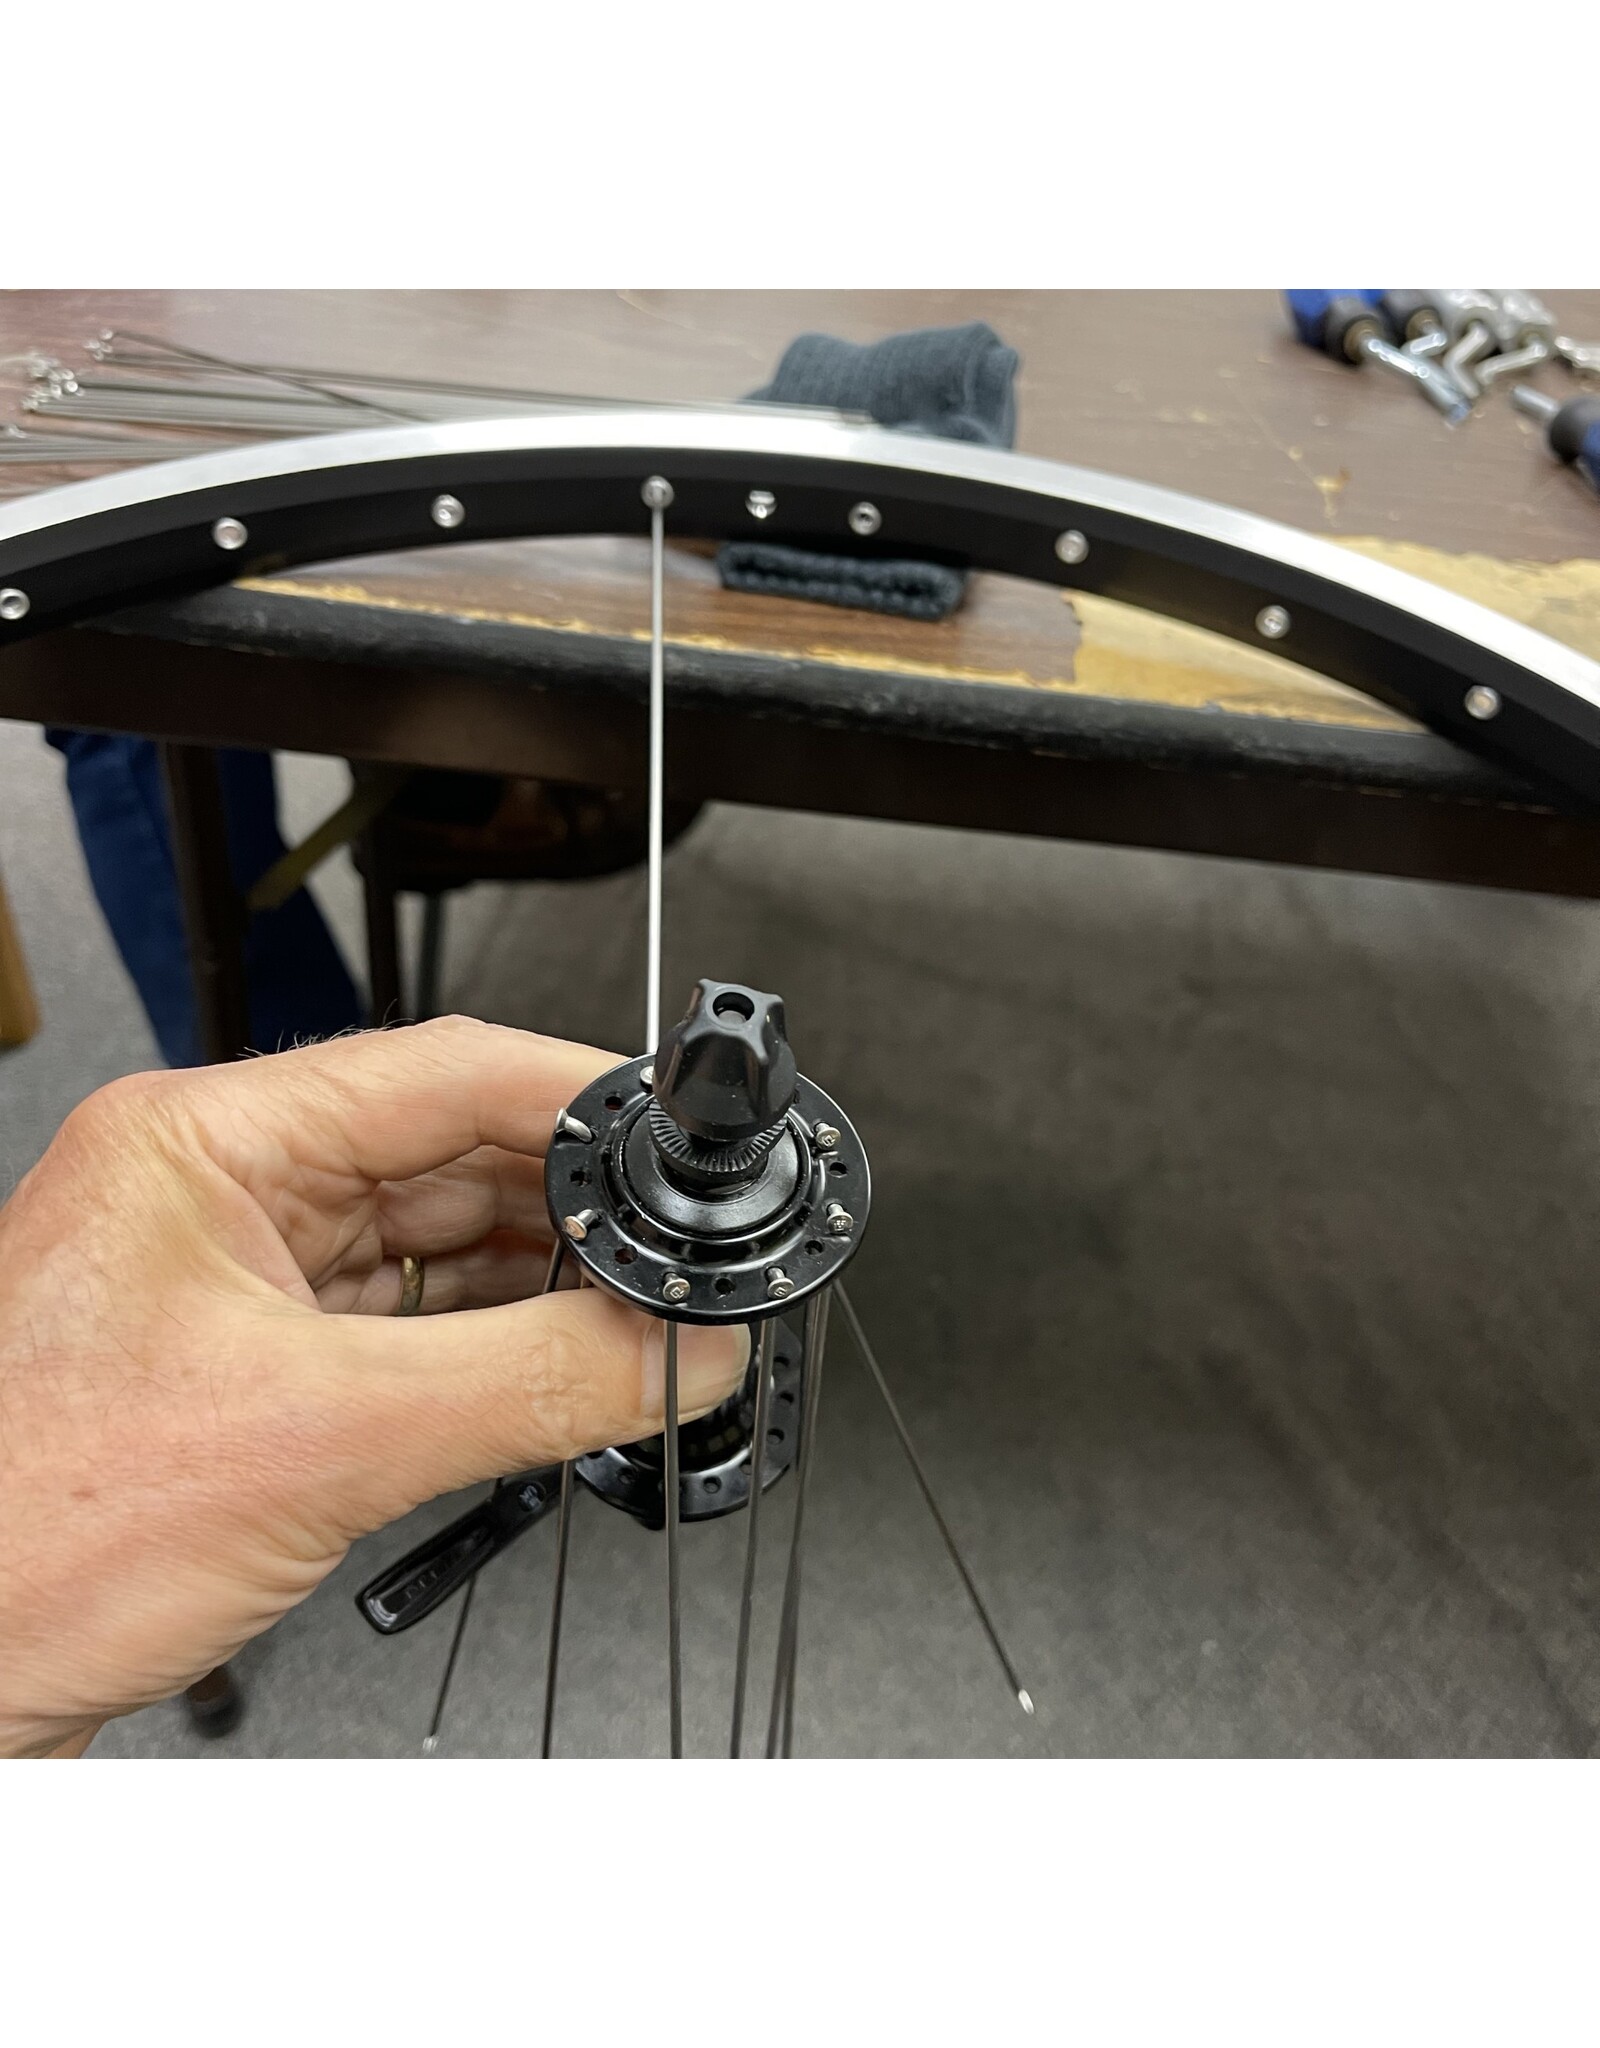 Introduction to Wheel Building